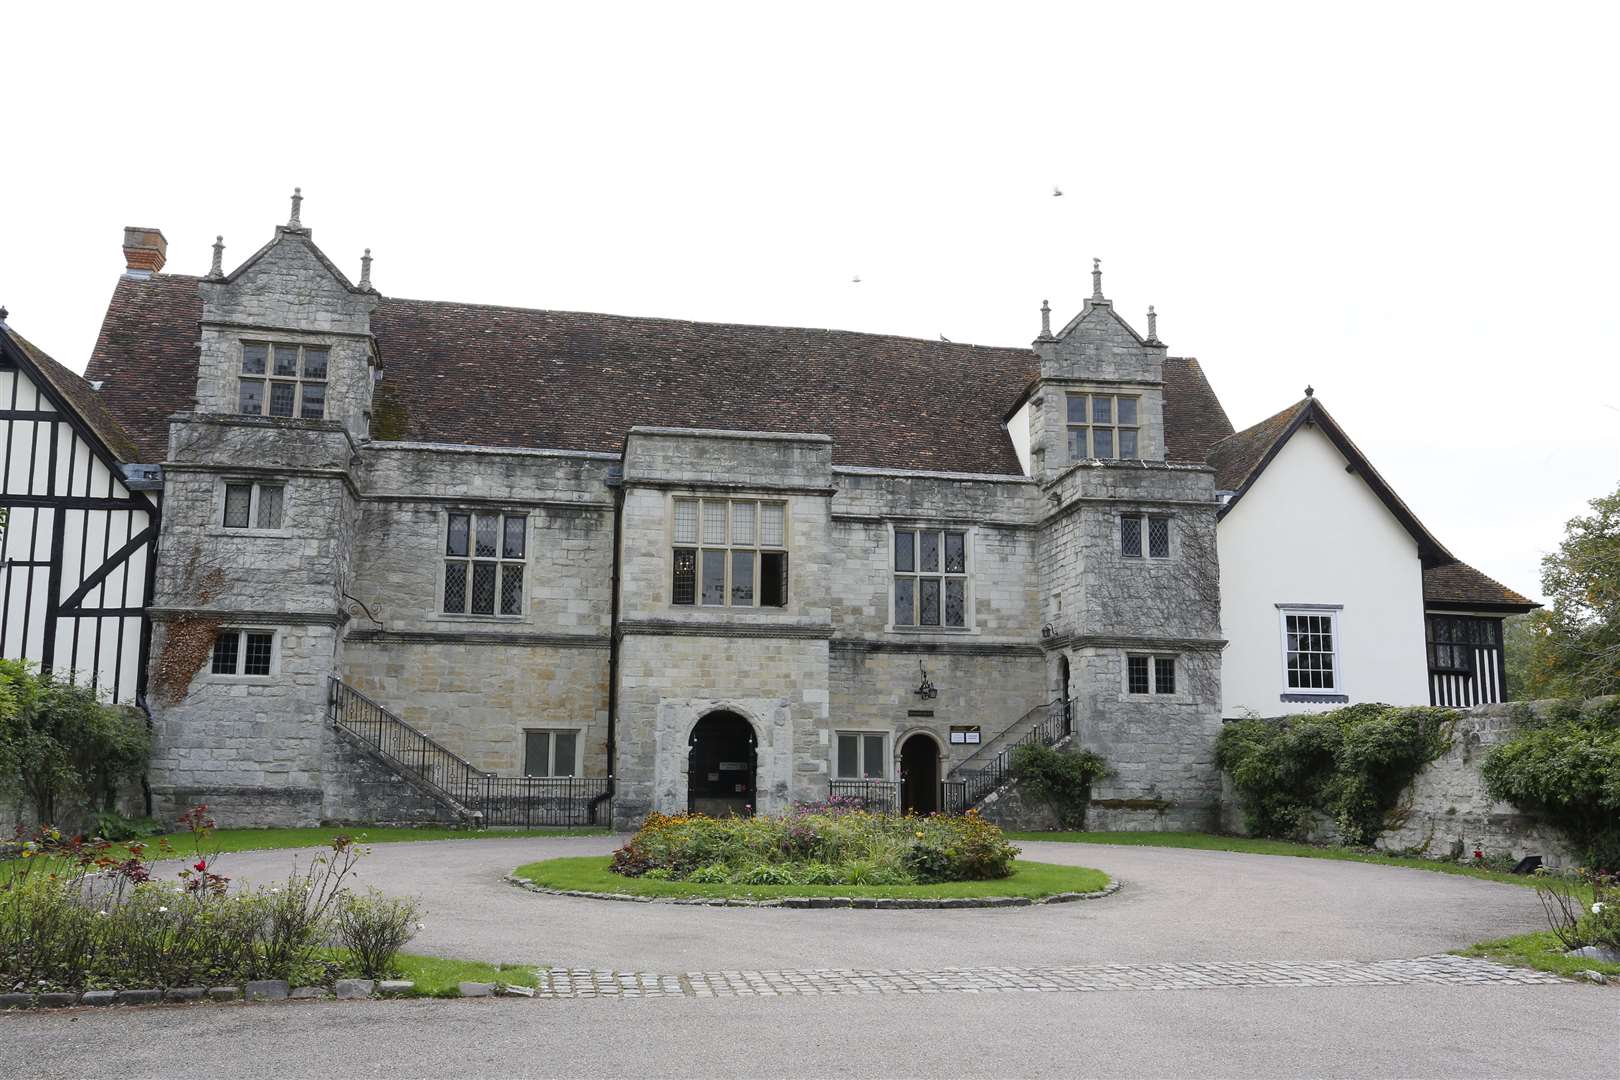 The Archbishop's Palace in Mill Street, Maidstone, dates from the 14th century